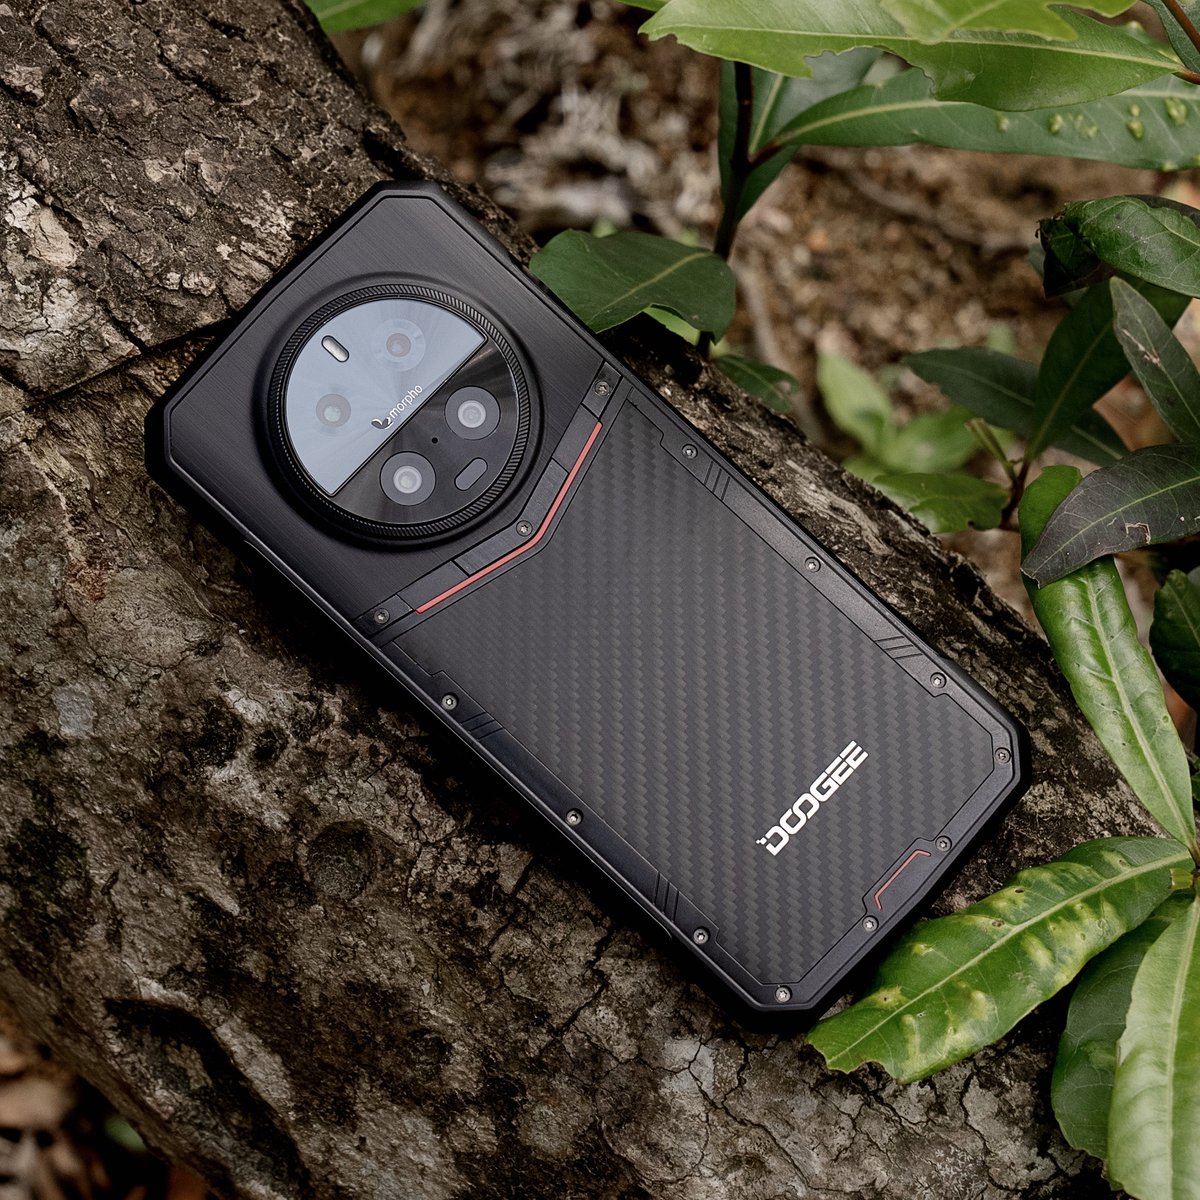 Ready to venture into the great outdoors with your #DoogeeDK10 rugged phone? Let's make some unforgettable memories! 🌲📱

Learn more: bit.ly/3xaJWVj

#DOOGEE #ruggedphone #bestbuy #tech #outdoorliving #outdoorlife #getoutdoors